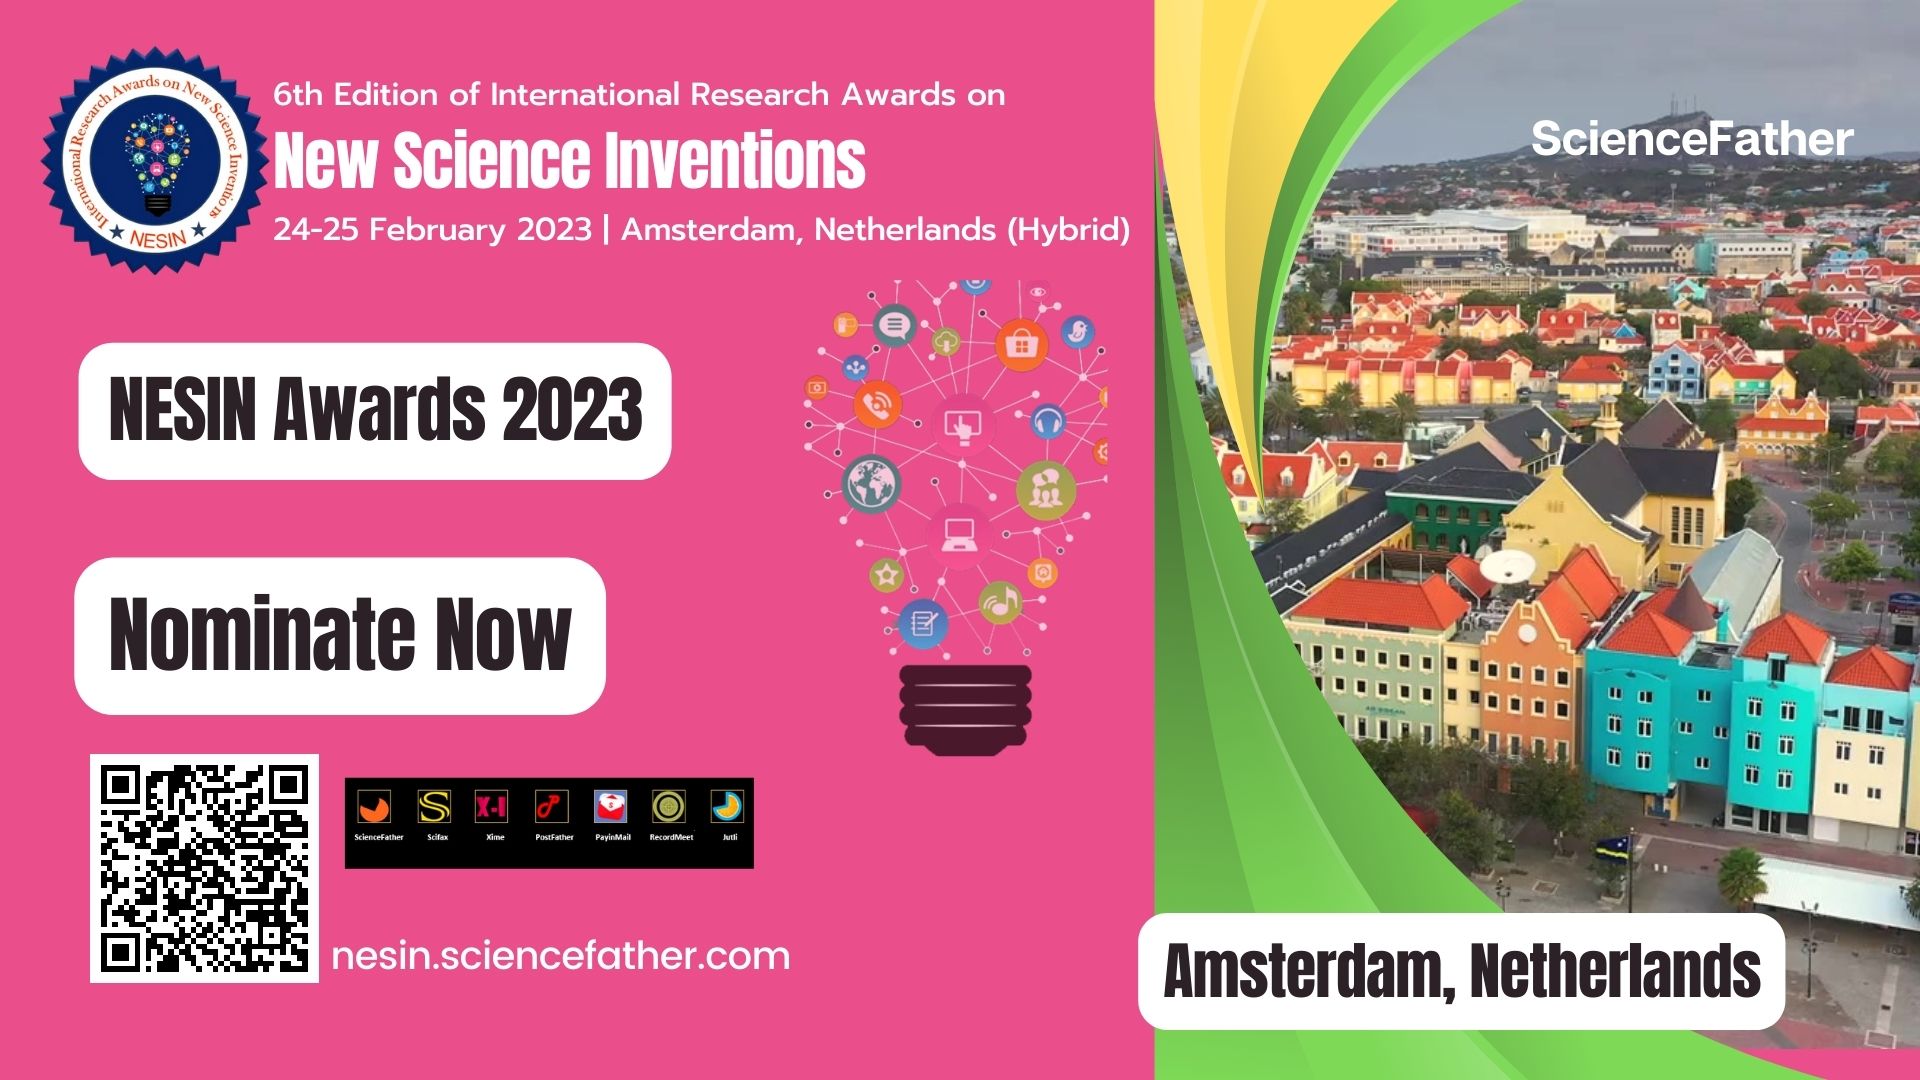 International Research Awards on New Science Inventions, Online Event